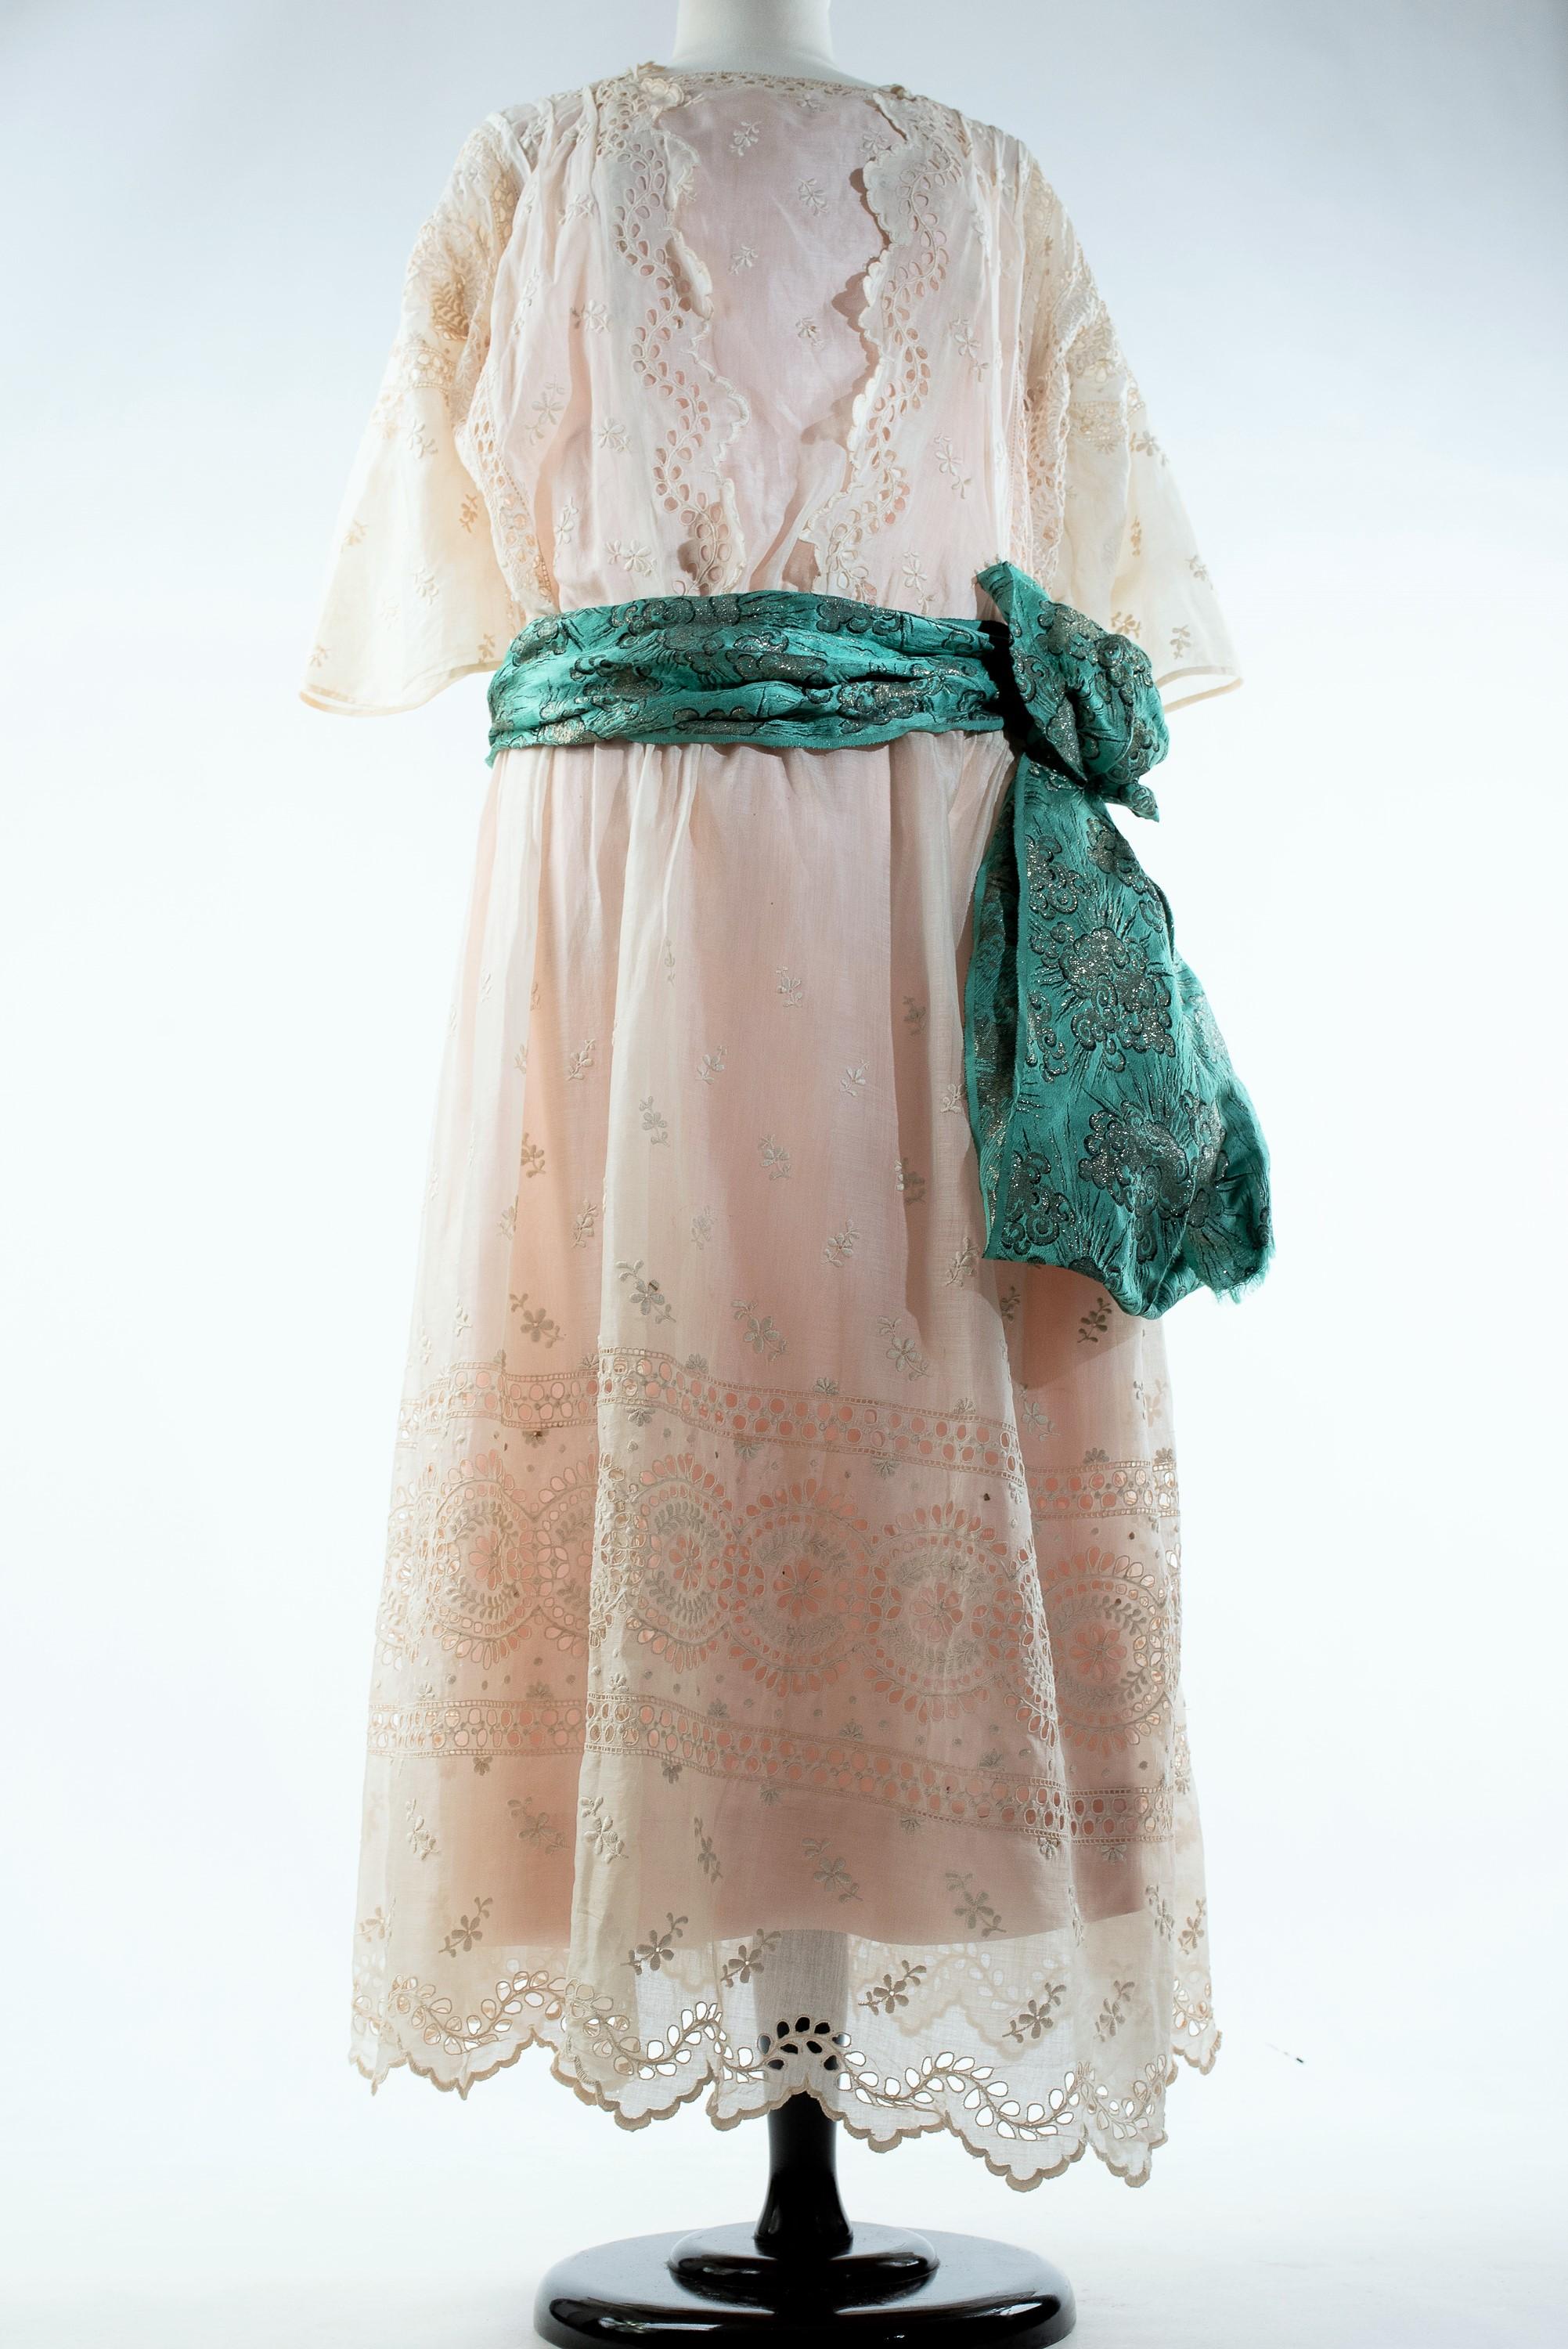 A silk pongee & White Embroidery Chiffon Summer Dress - France Circa 1920 For Sale 6